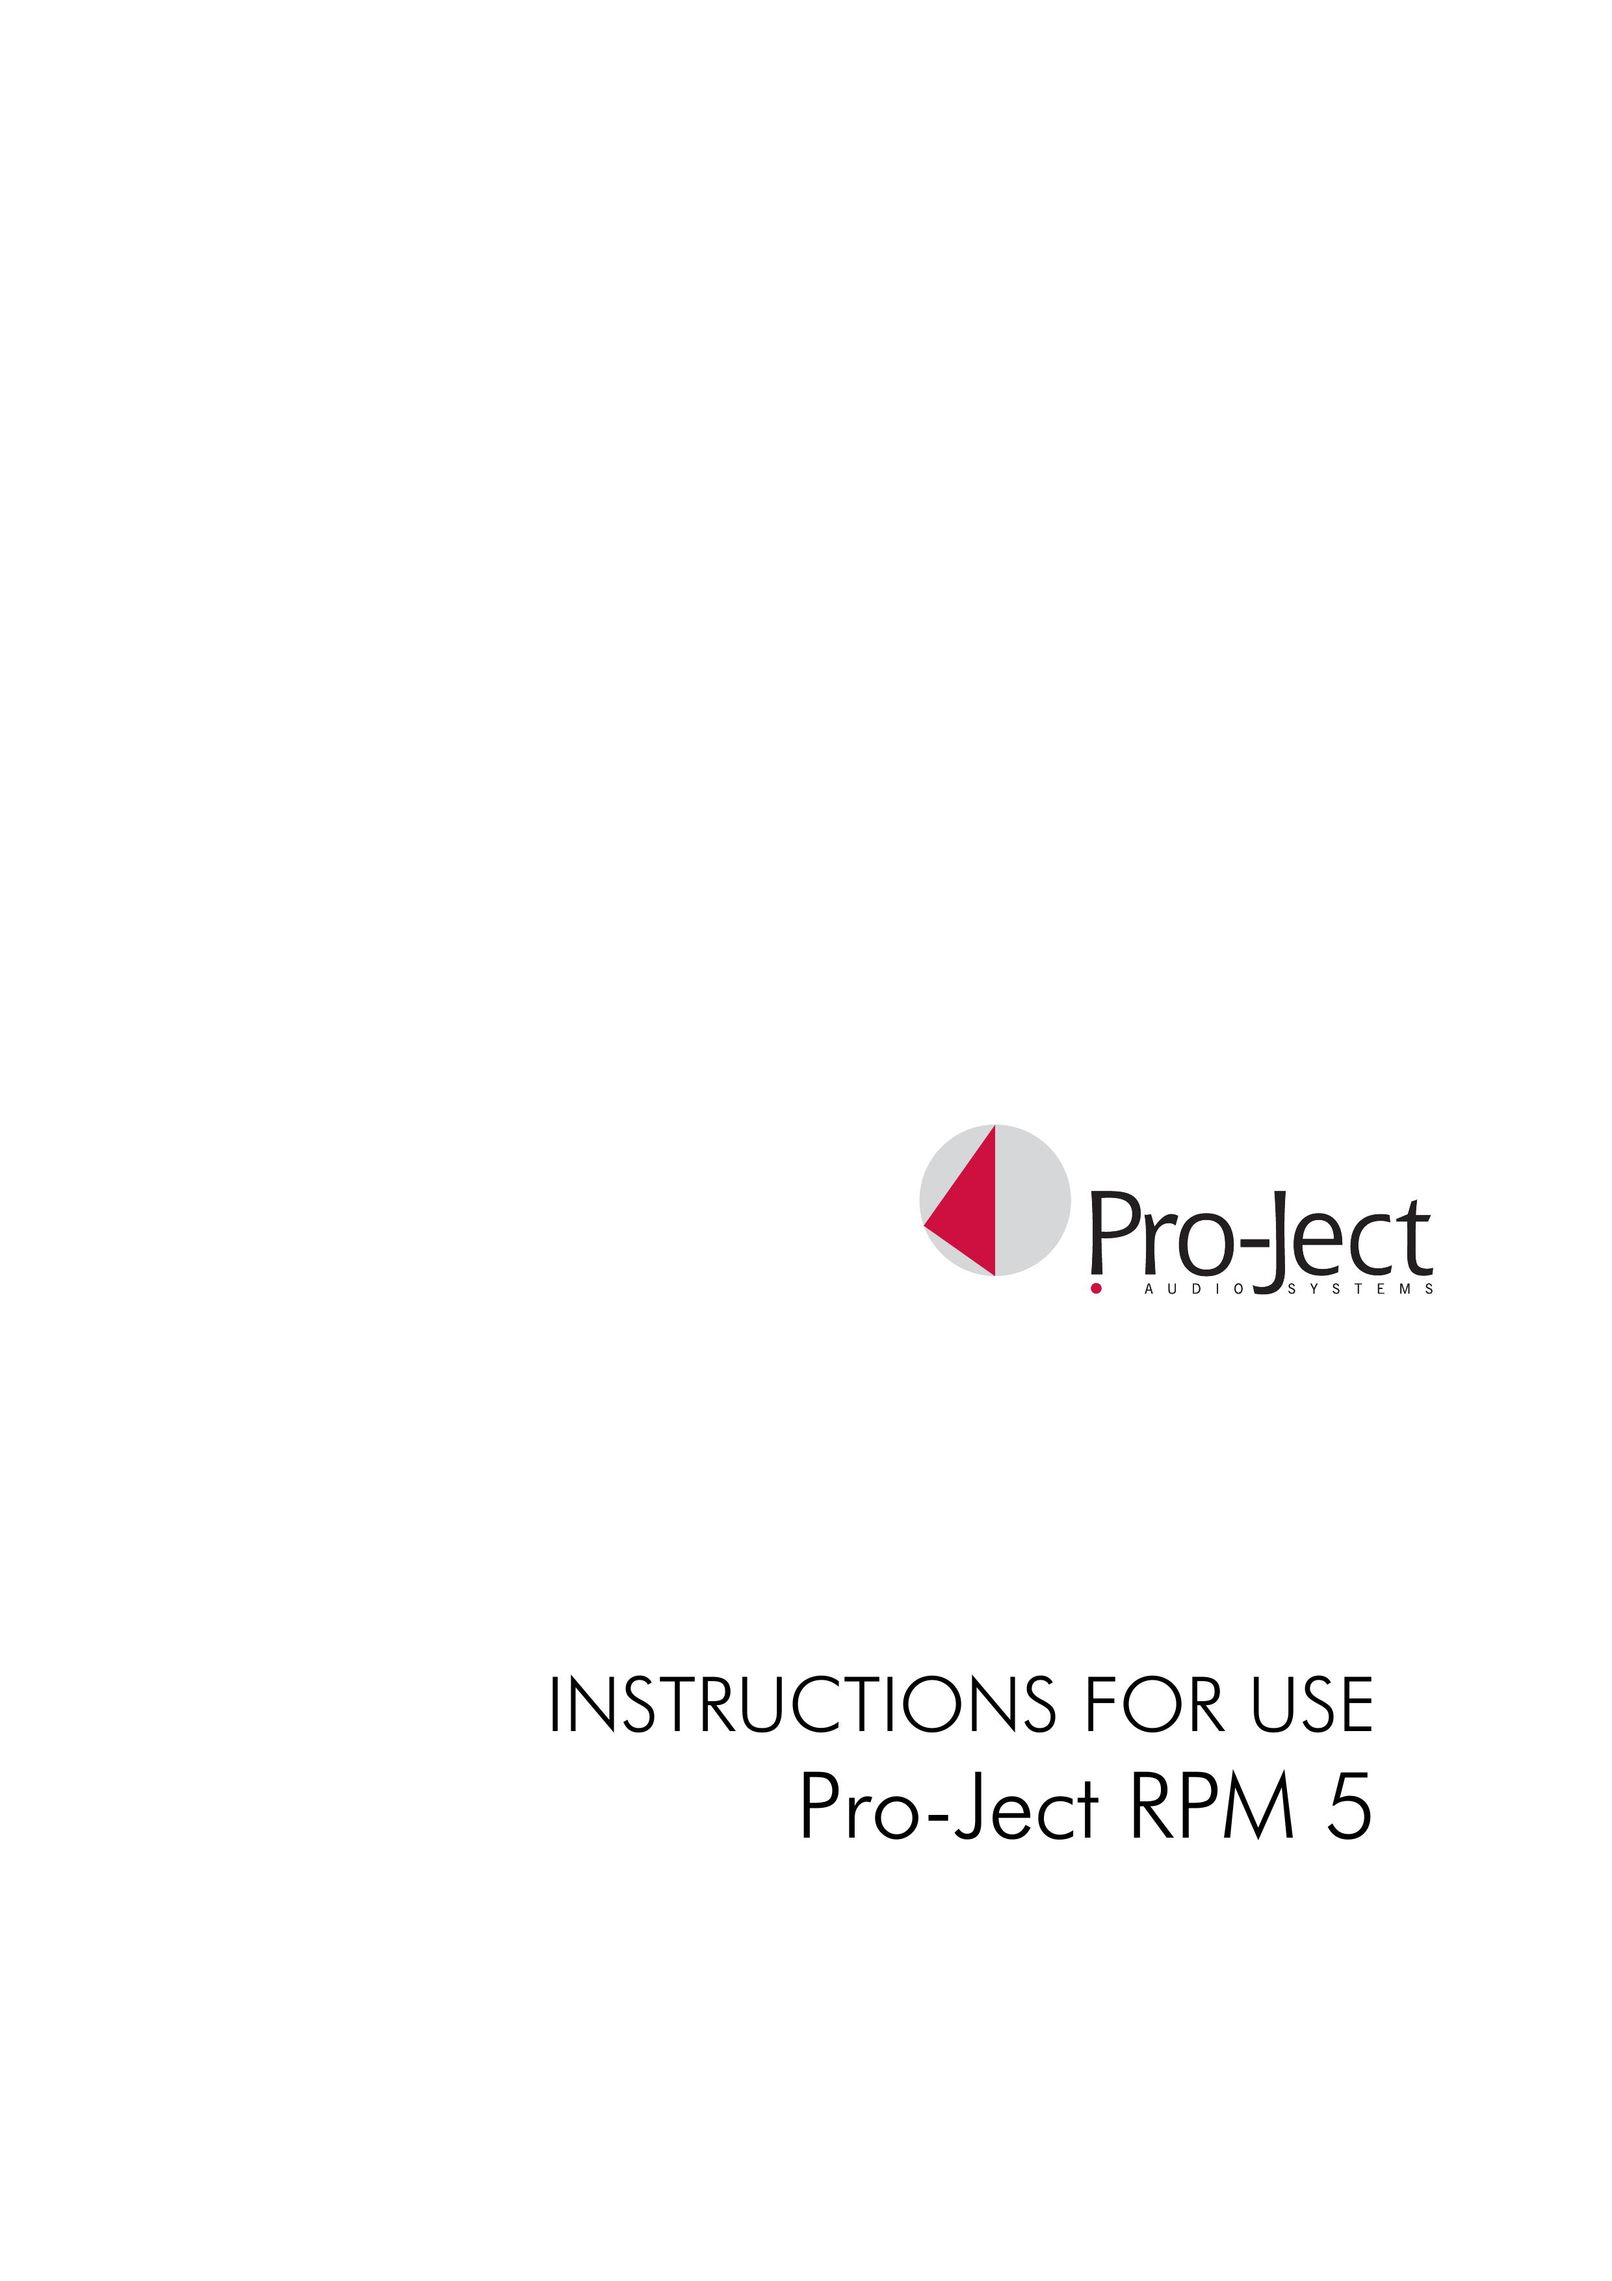 Pro-Ject PRO-JECT RPM 5 Stereo System User Manual